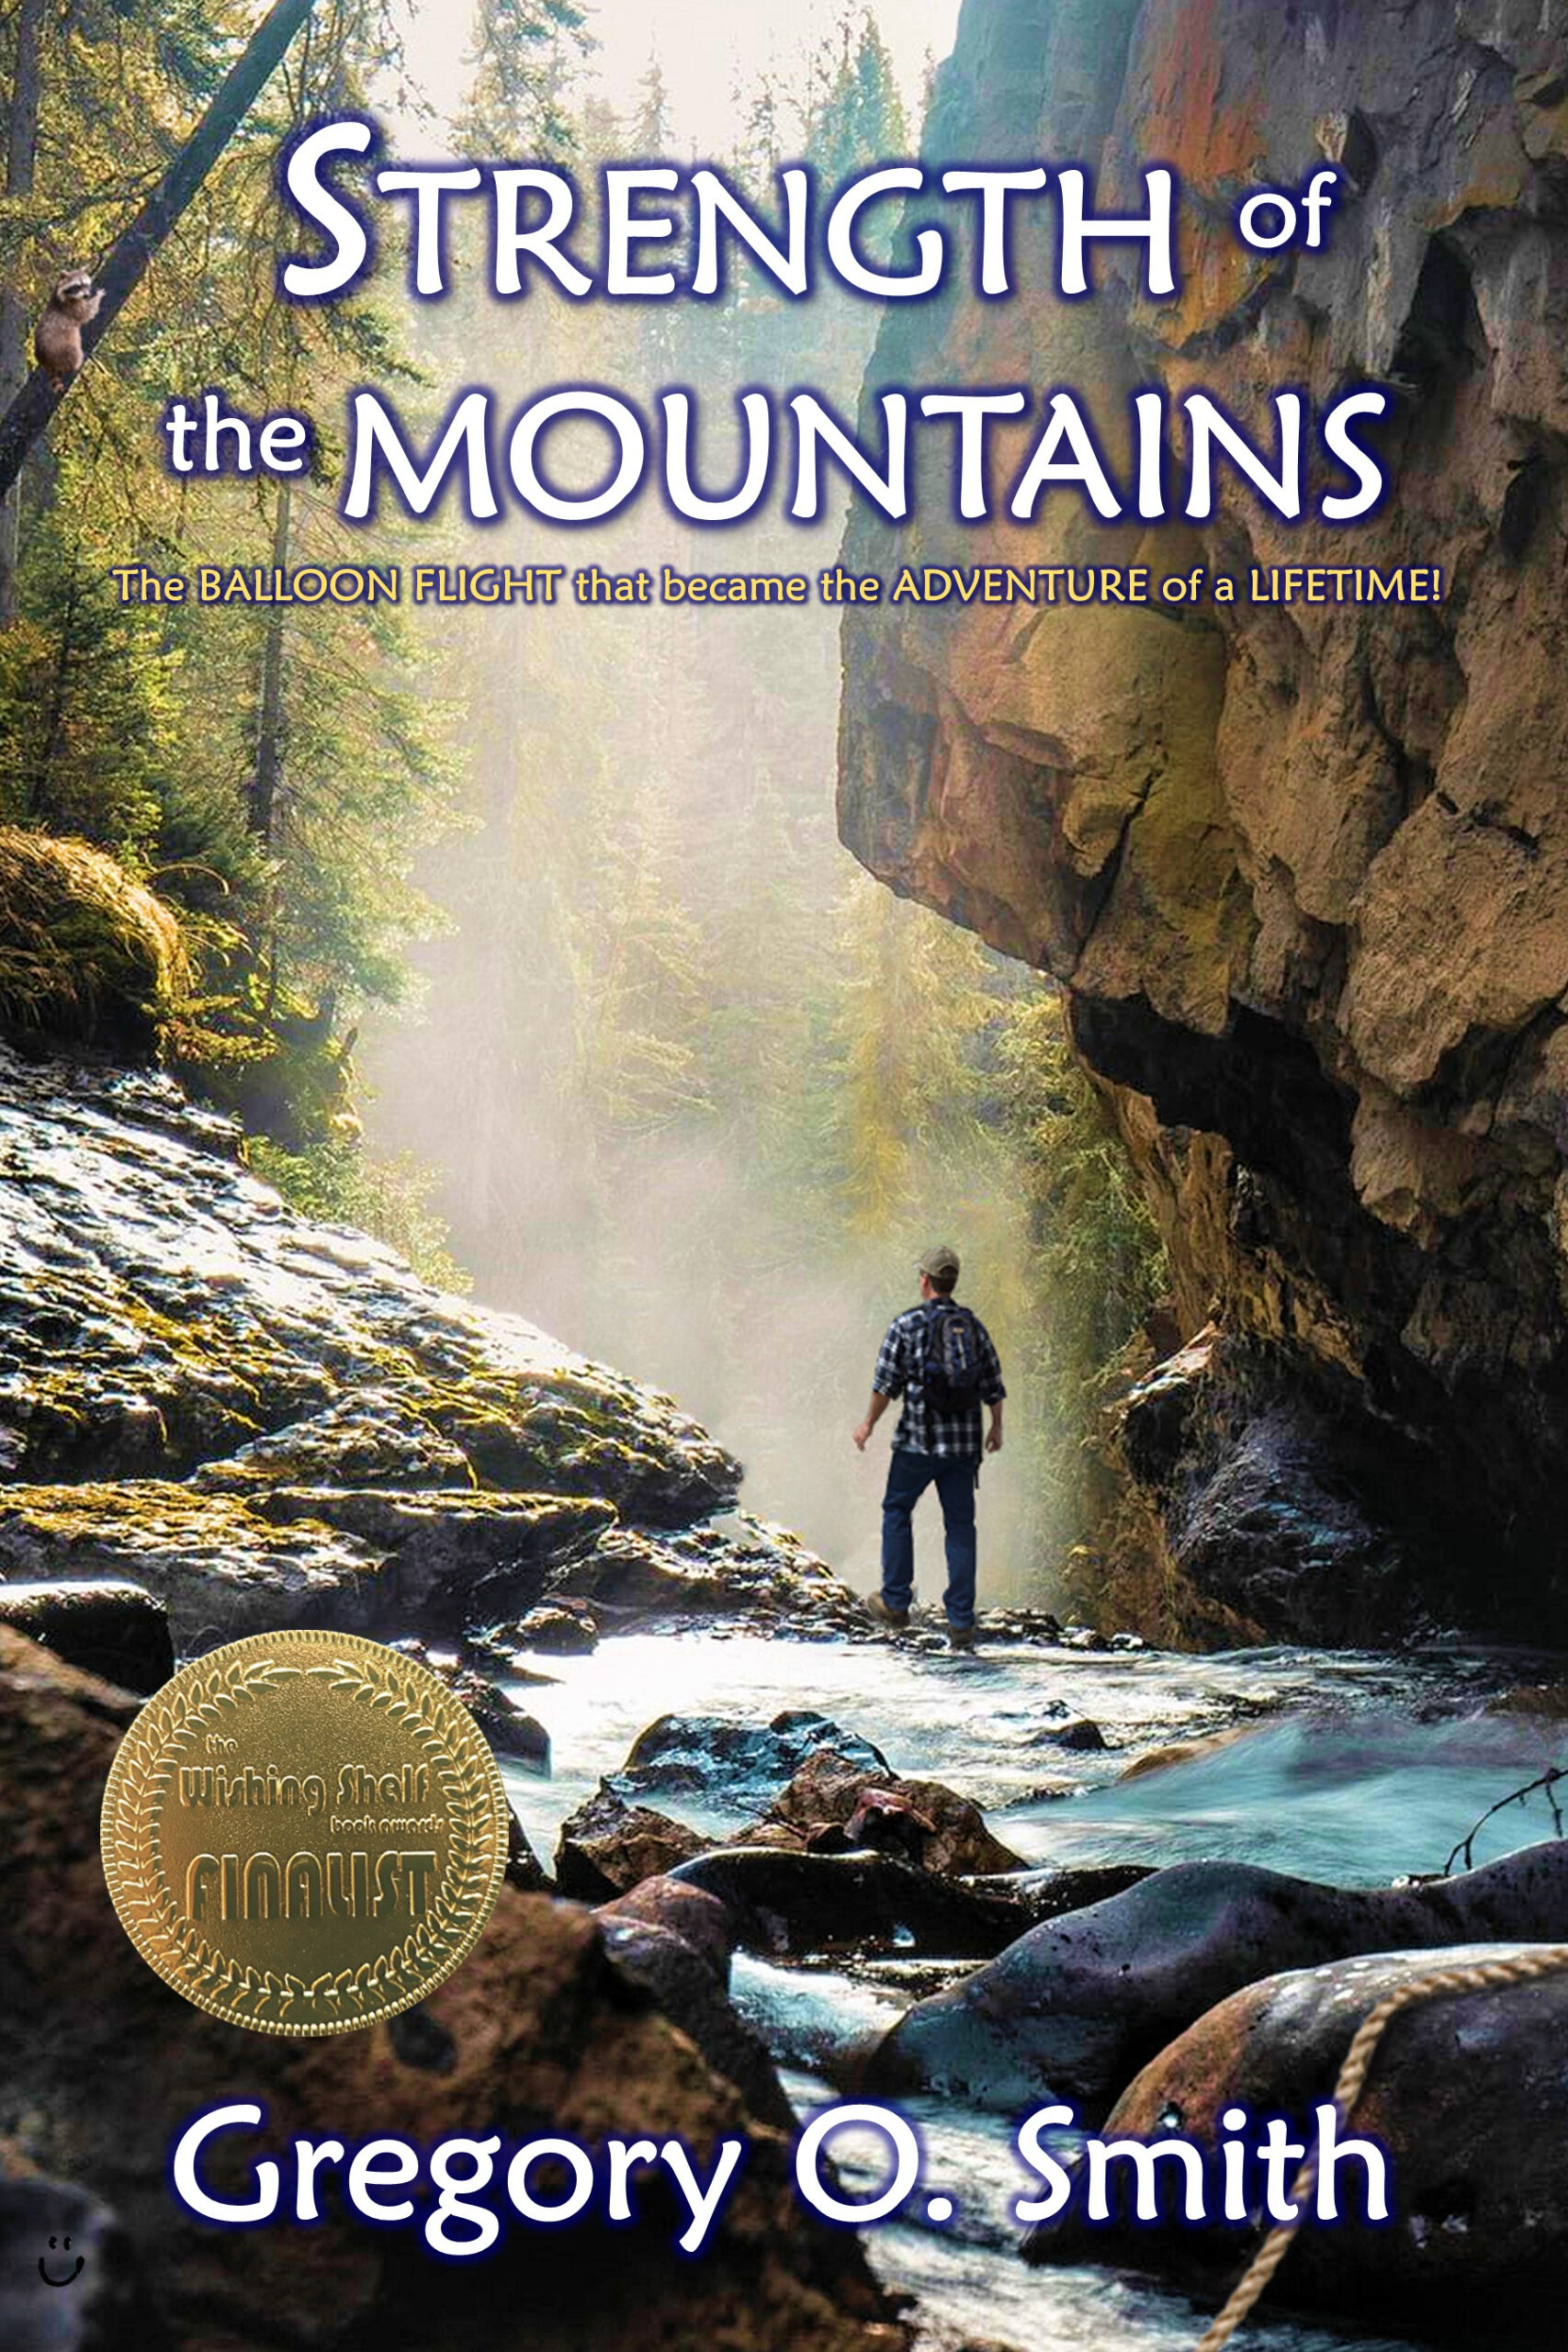 Cover designed by Anne R. Smith for Strength of the Mountains children's survival book by Gregory O. Smith